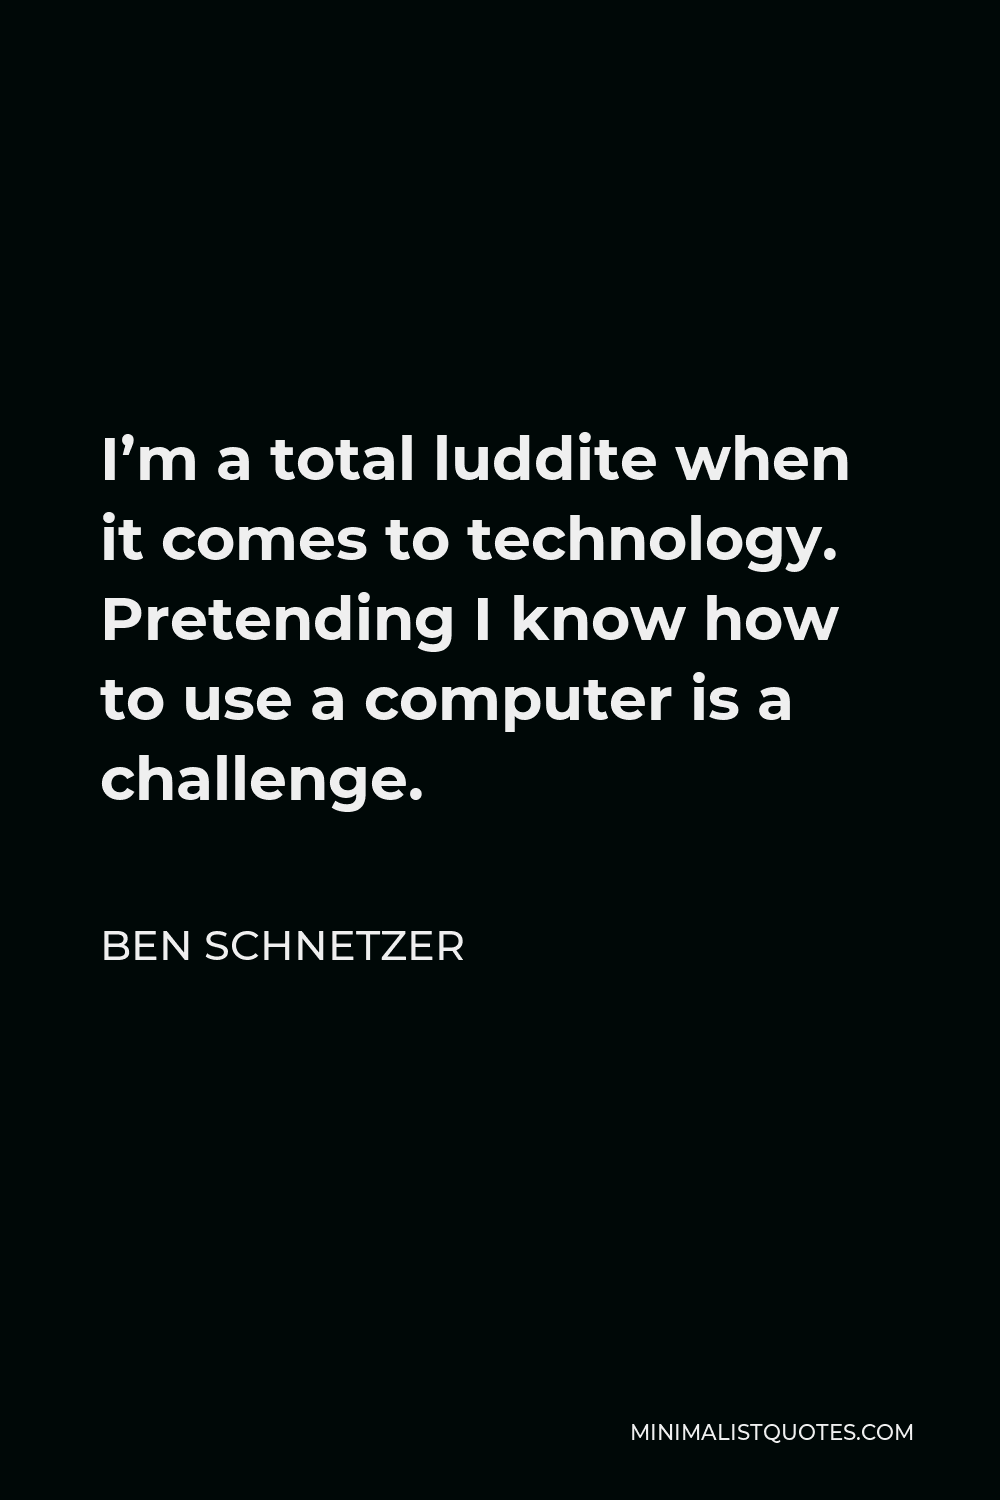 Ben Schnetzer Quote - I’m a total luddite when it comes to technology. Pretending I know how to use a computer is a challenge.